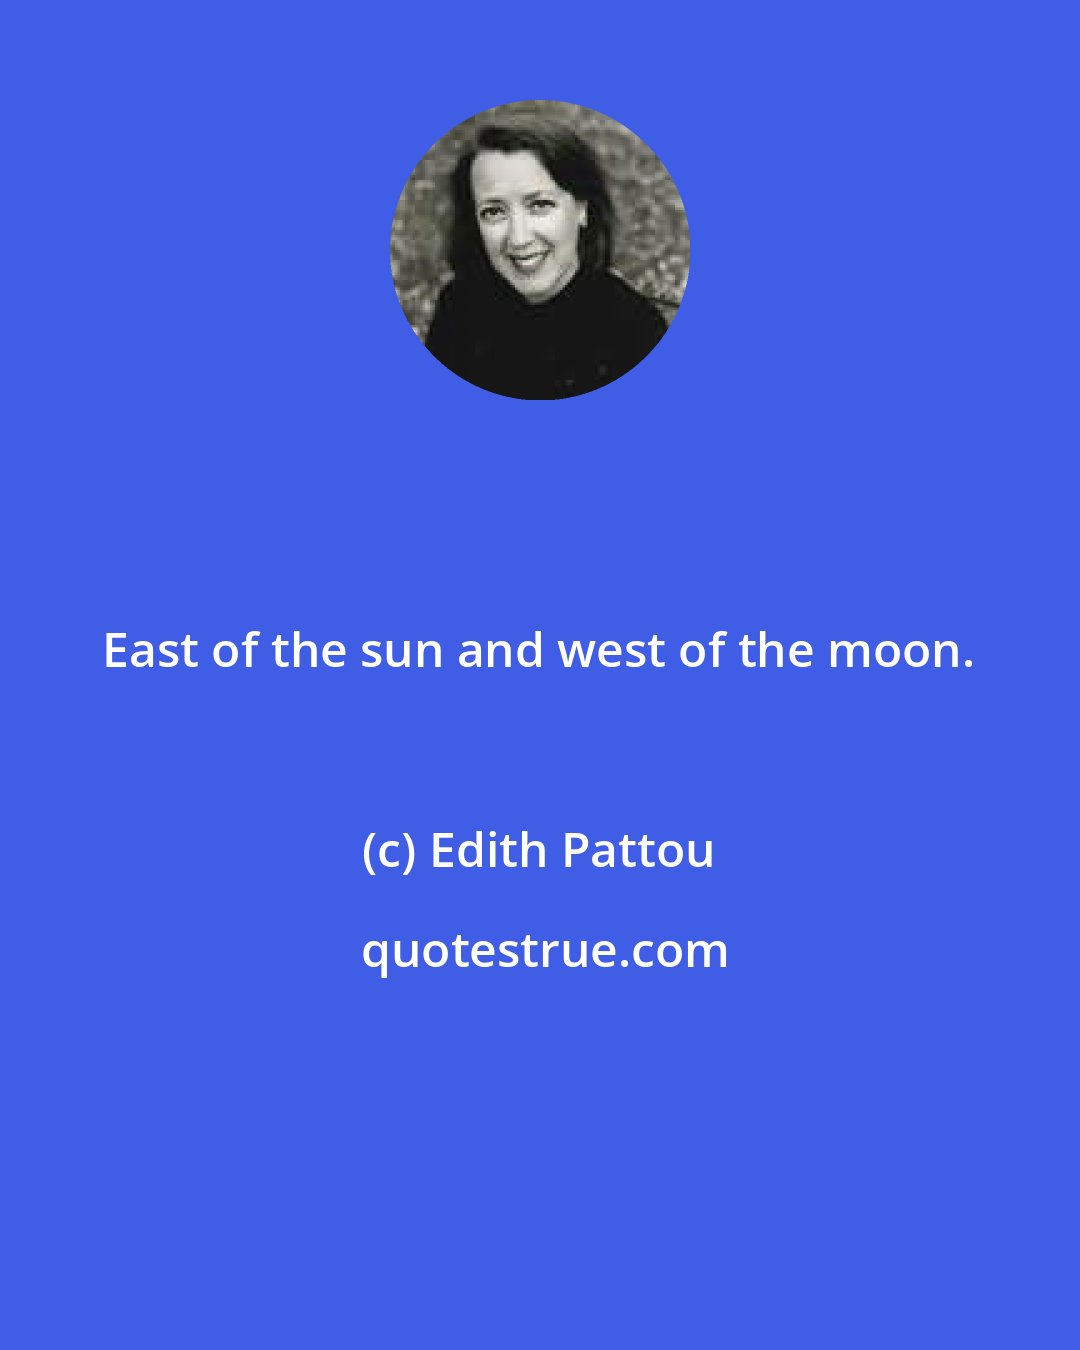 Edith Pattou: East of the sun and west of the moon.